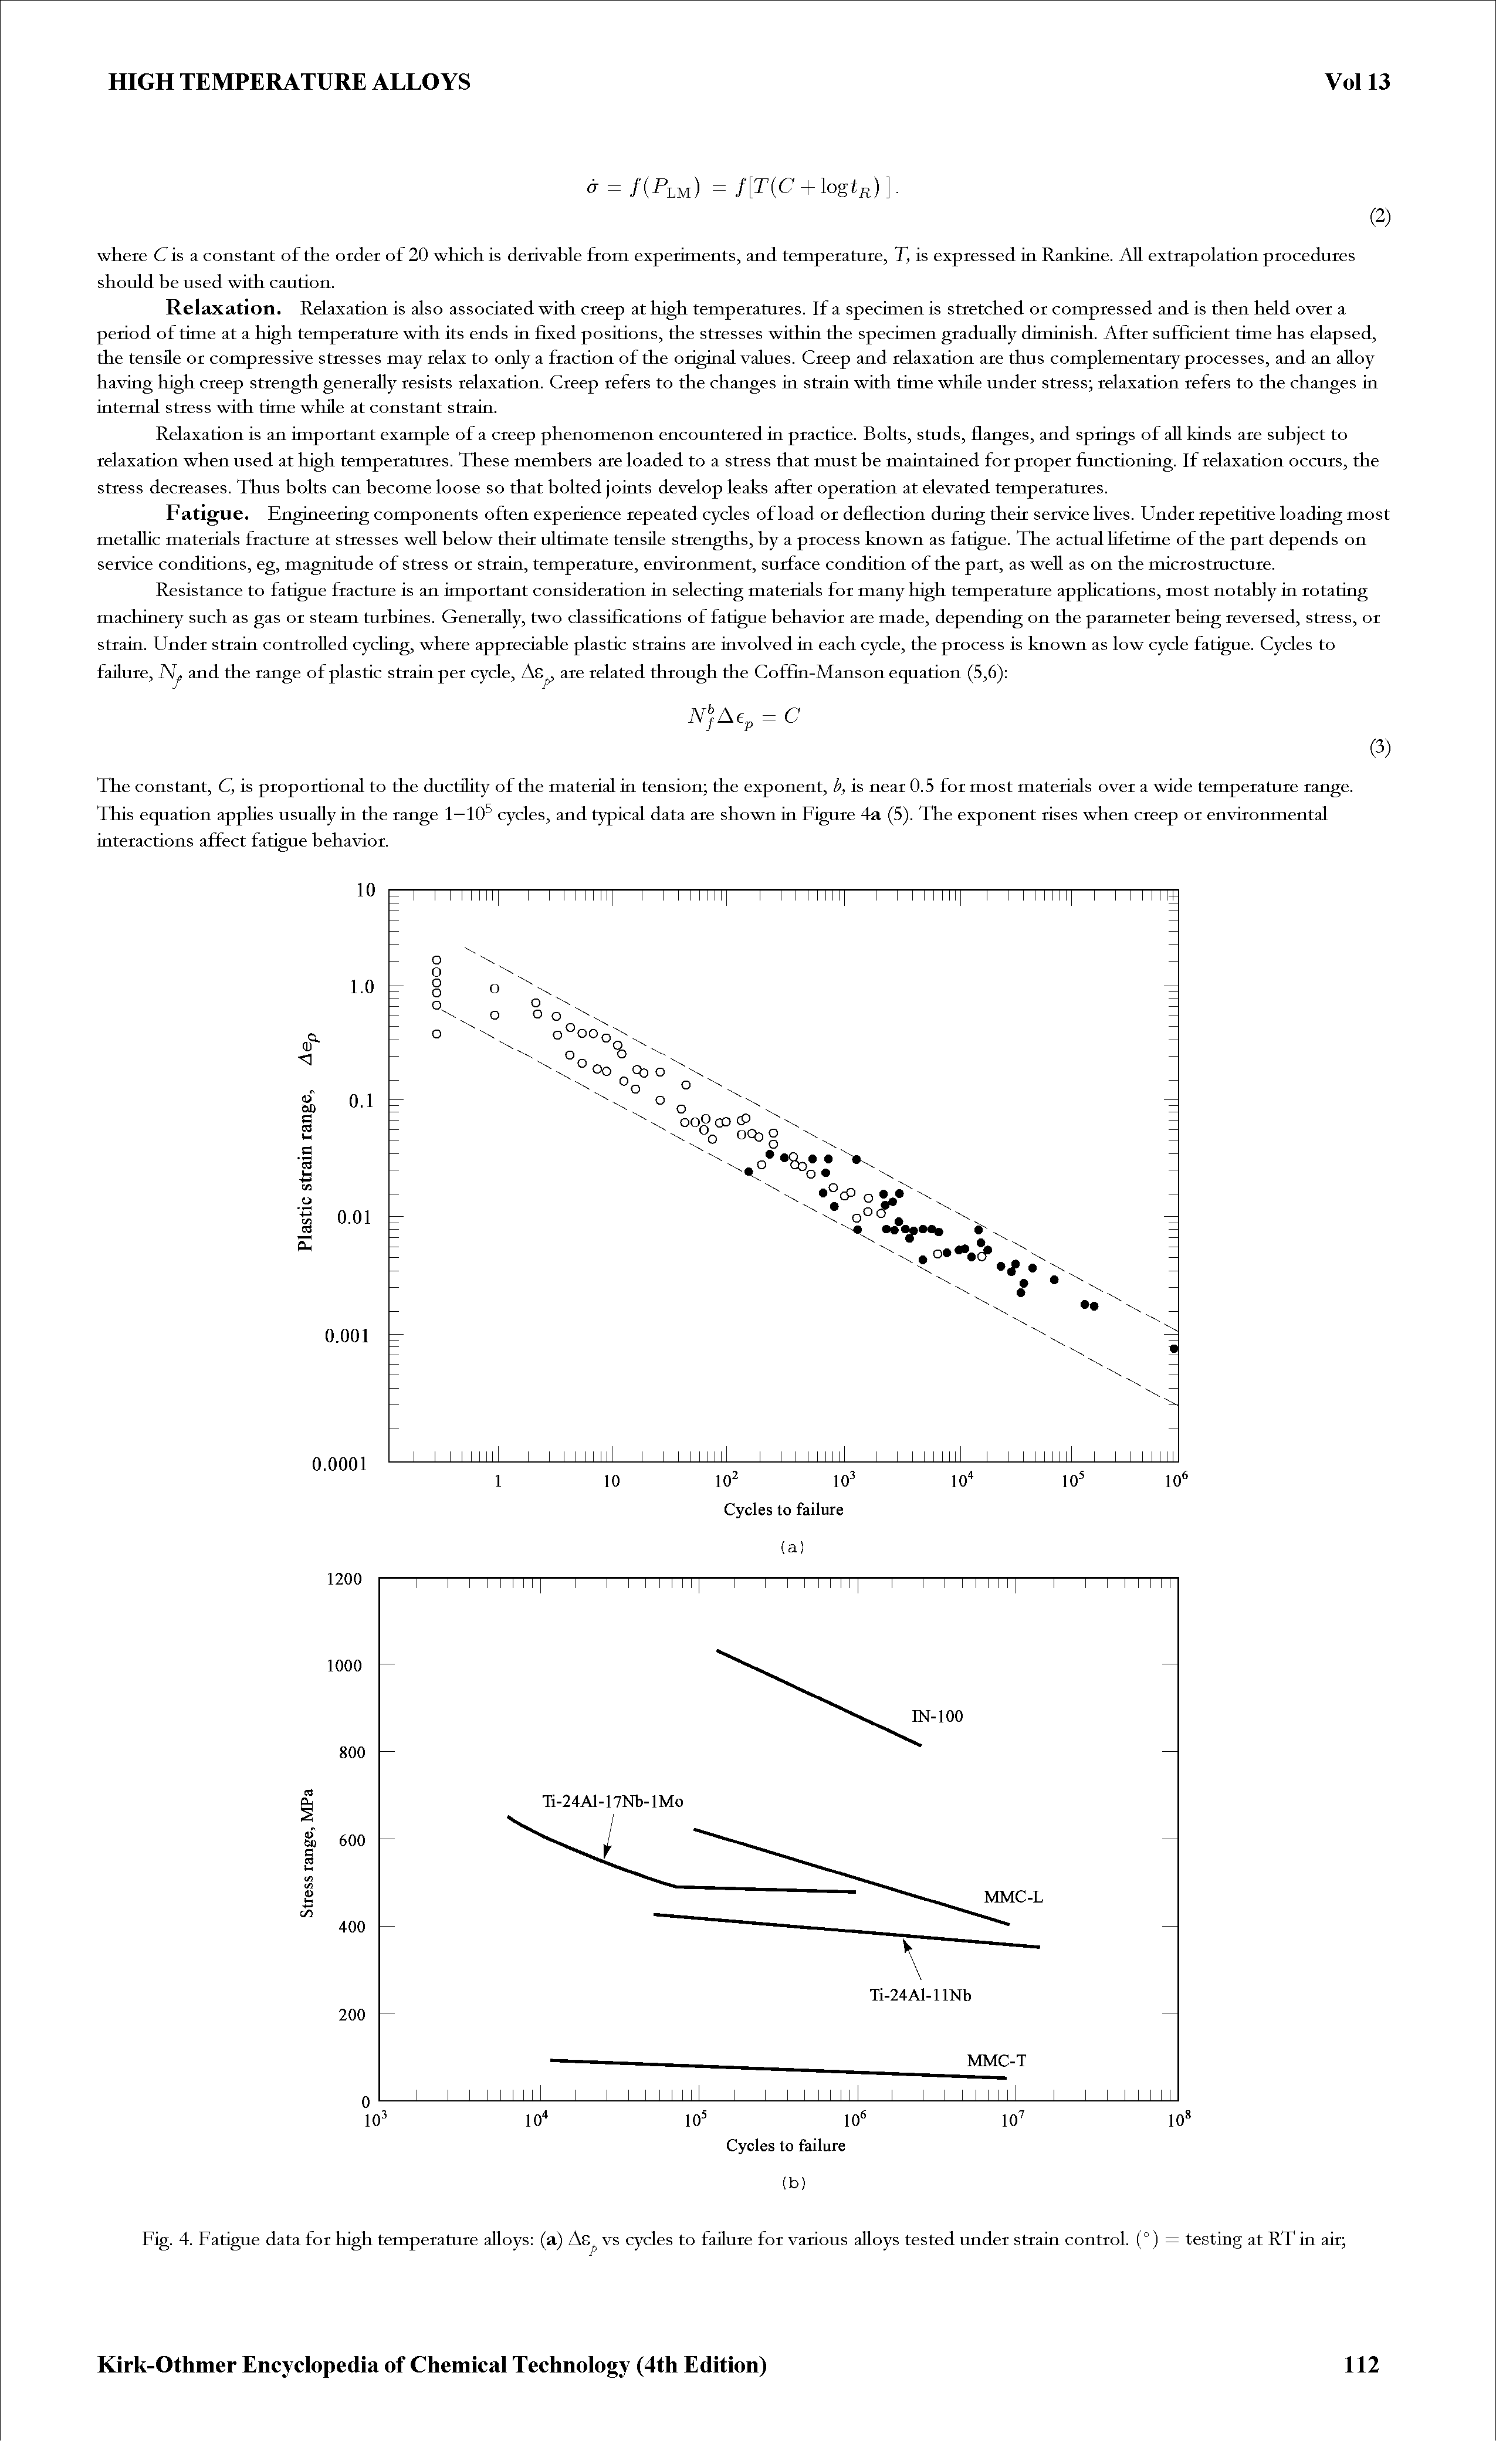 Fig. 4. Fatigue data for high temperature alloys (a) As vs cycles to failure for various alloys tested under strain control. (°) = testing at RT in air ...